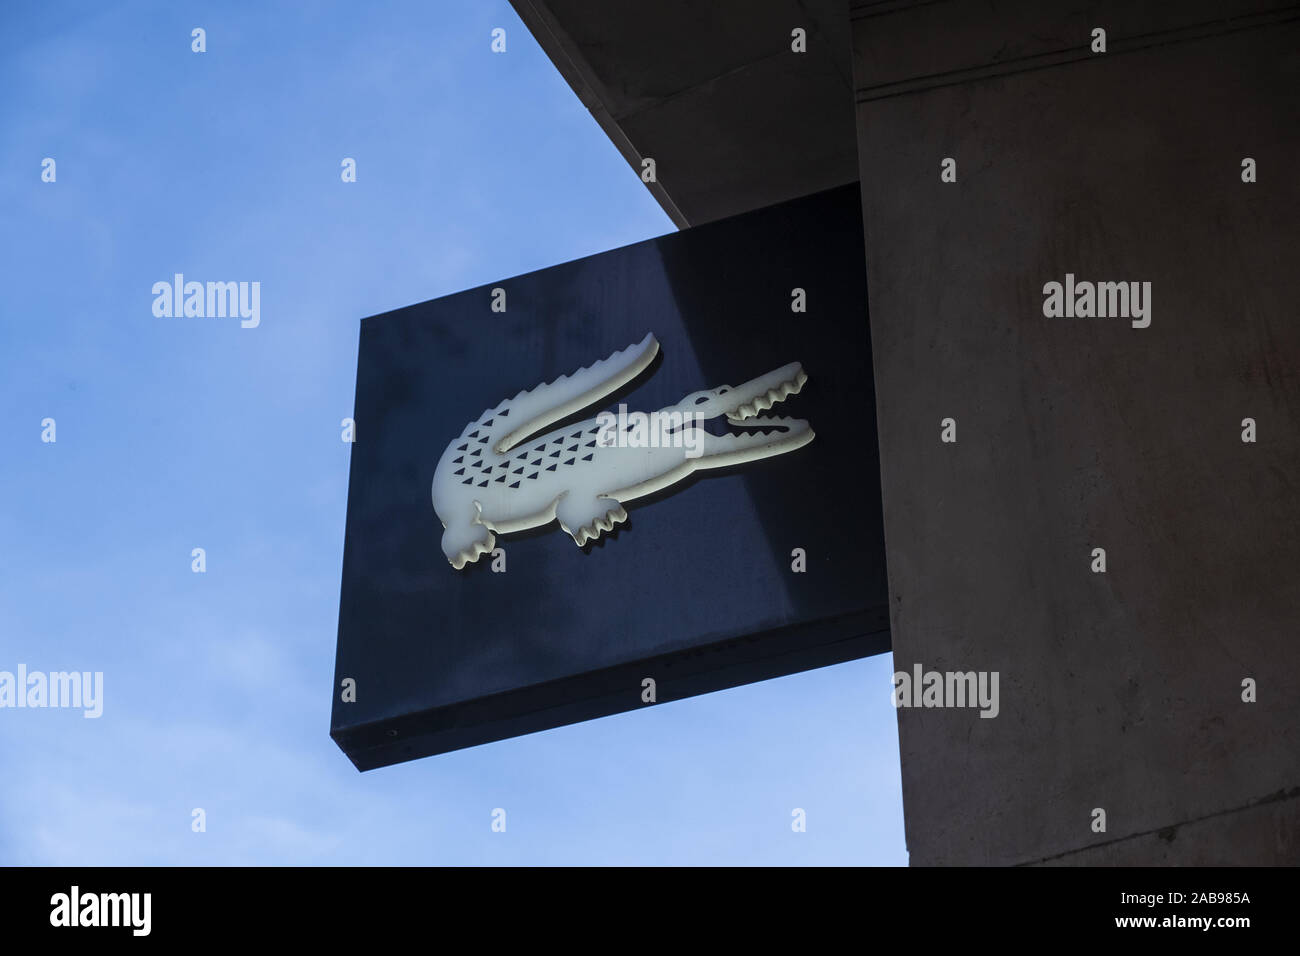 Lacoste shop barcelona hi-res stock photography and images - Alamy